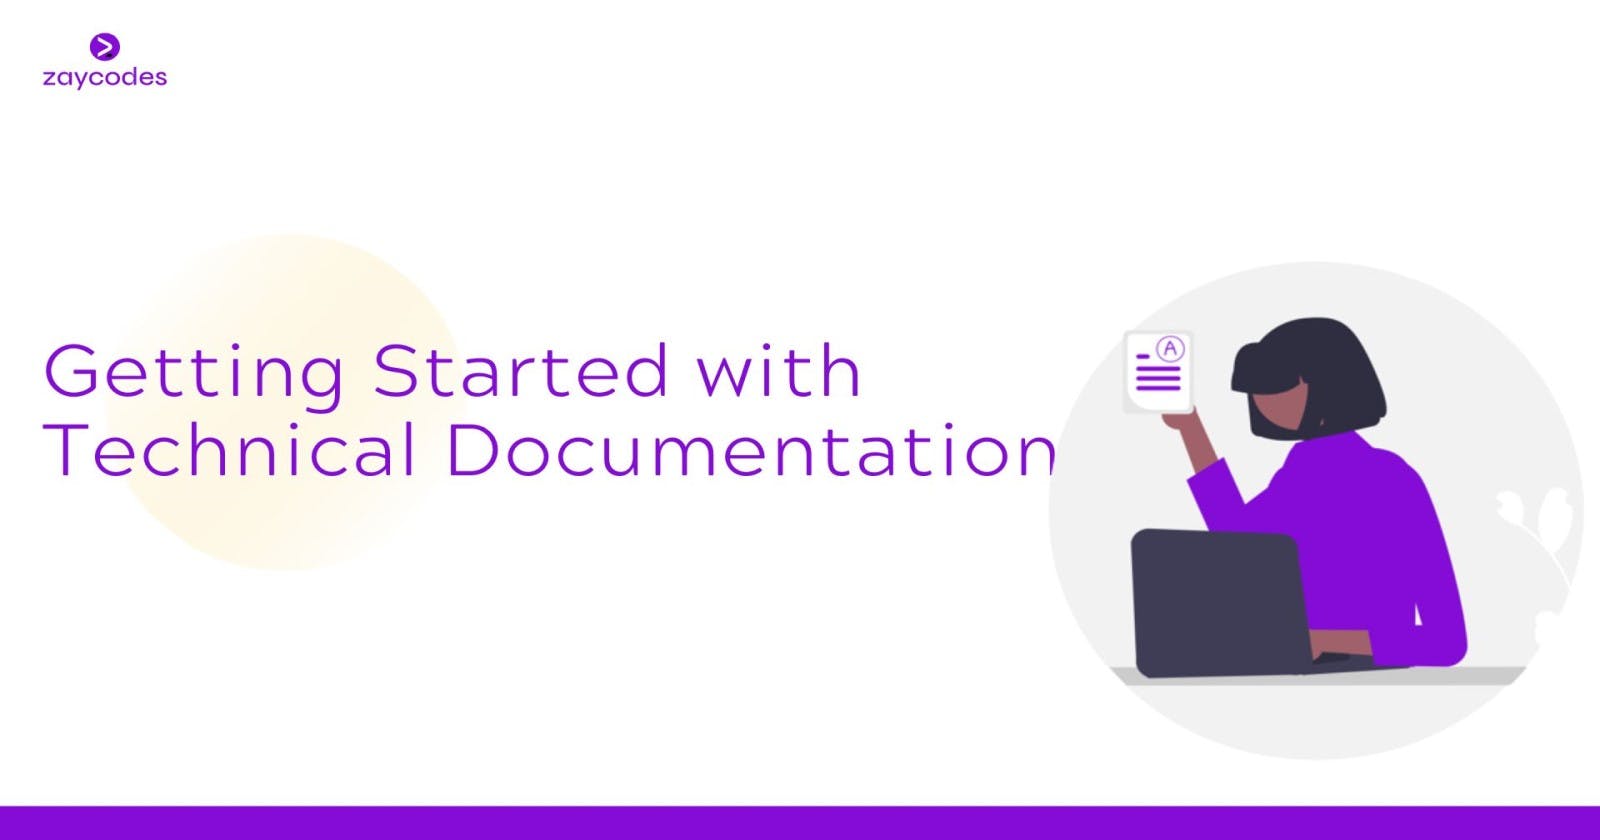 Getting Started with Technical Documentation